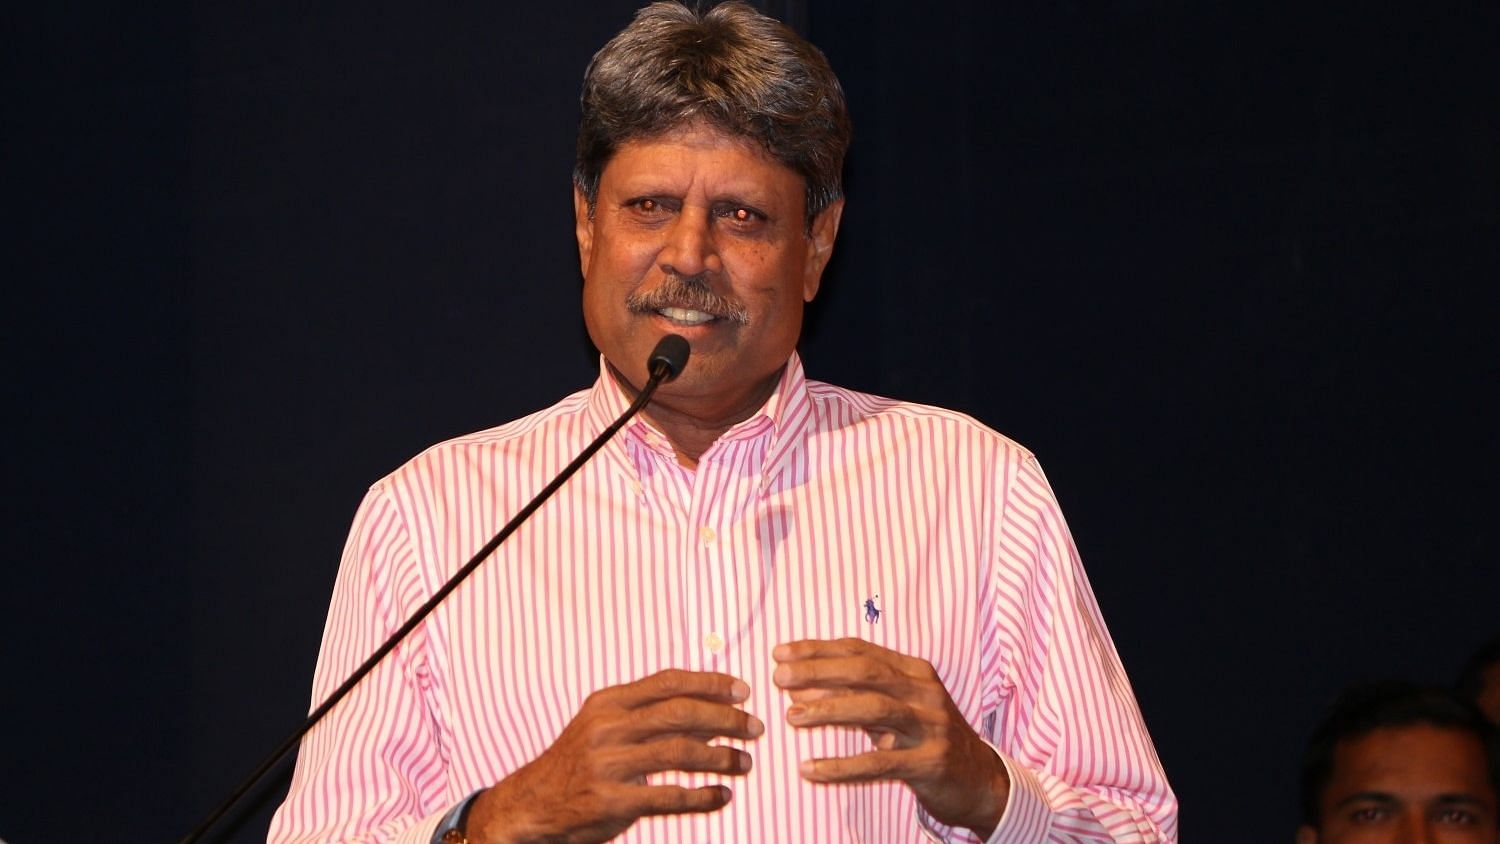 Kapil Dev criticised the Indian batting line-up for failing to score even 200 runs in 2 innings in the Wellington Test.